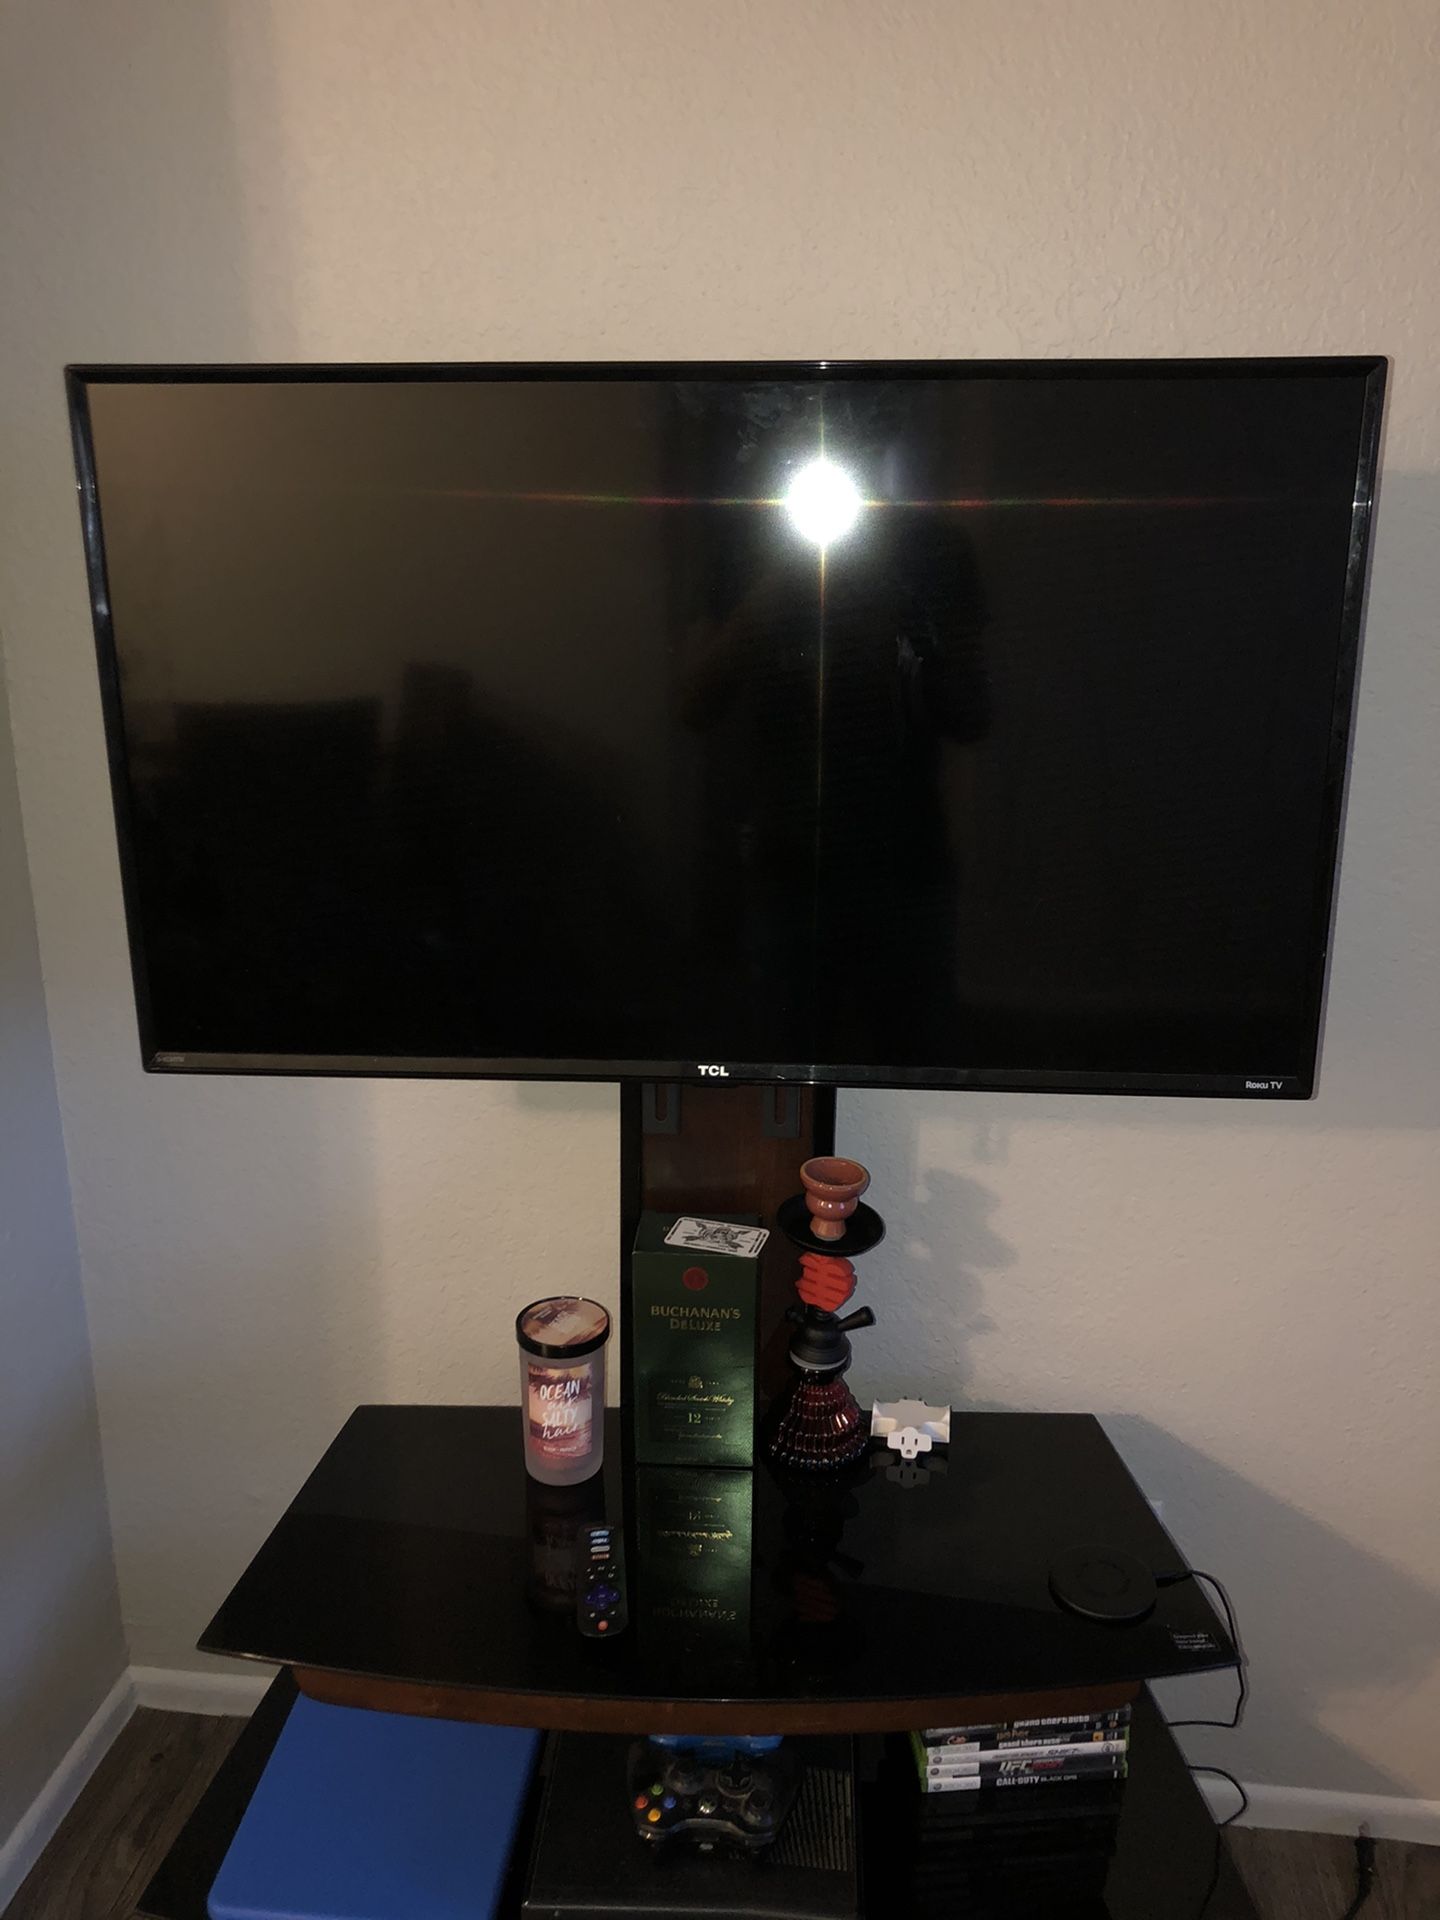 40 inch tcl roku tv. Tv stand not included